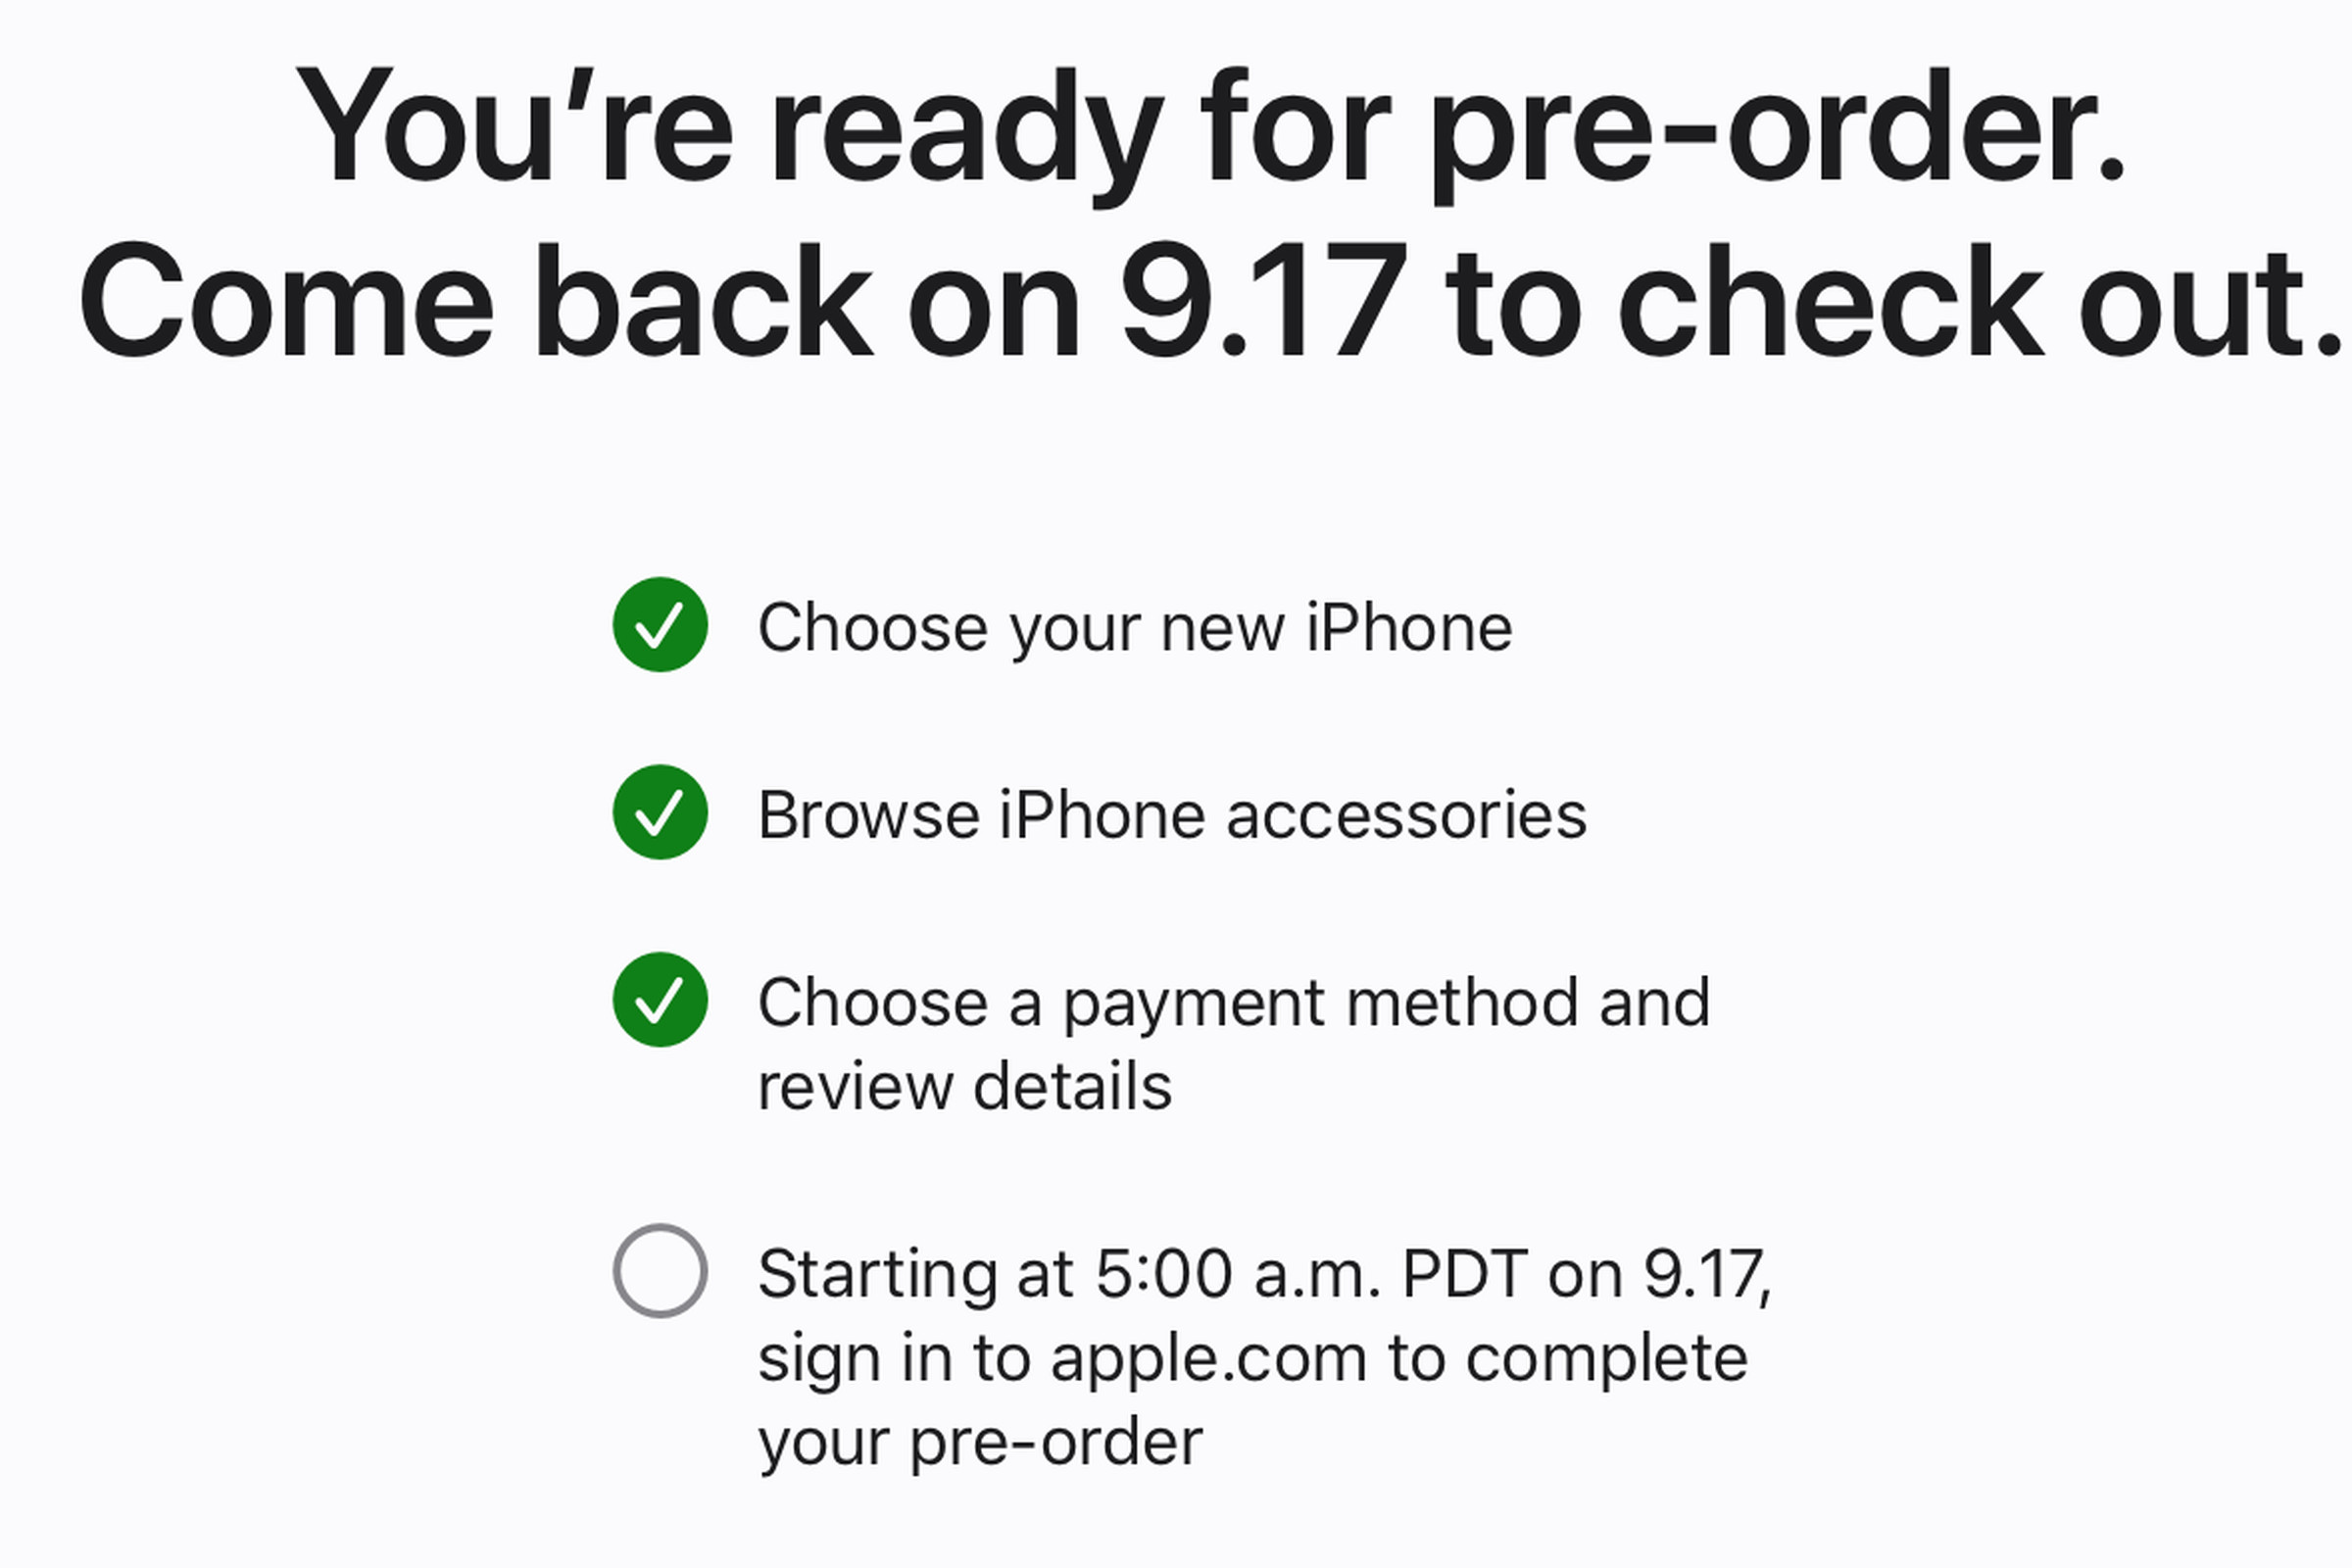 The process lets you make your selection ahead of preorders opening.